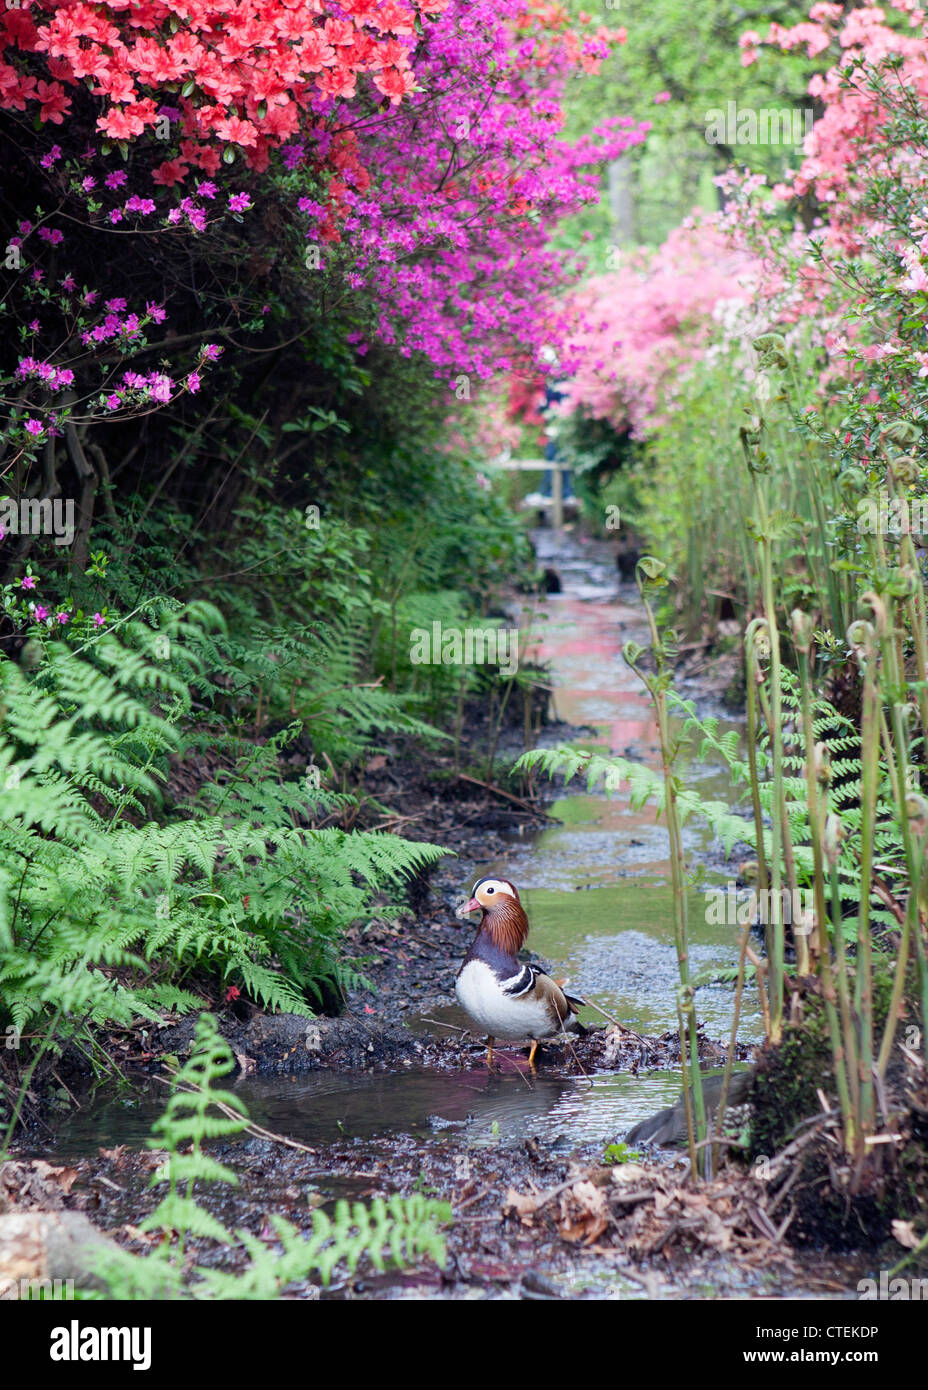 A Mandarin Drake in a stream amidst the rhododendrons - Isabella Plantation, Richmond Park, UK Stock Photo